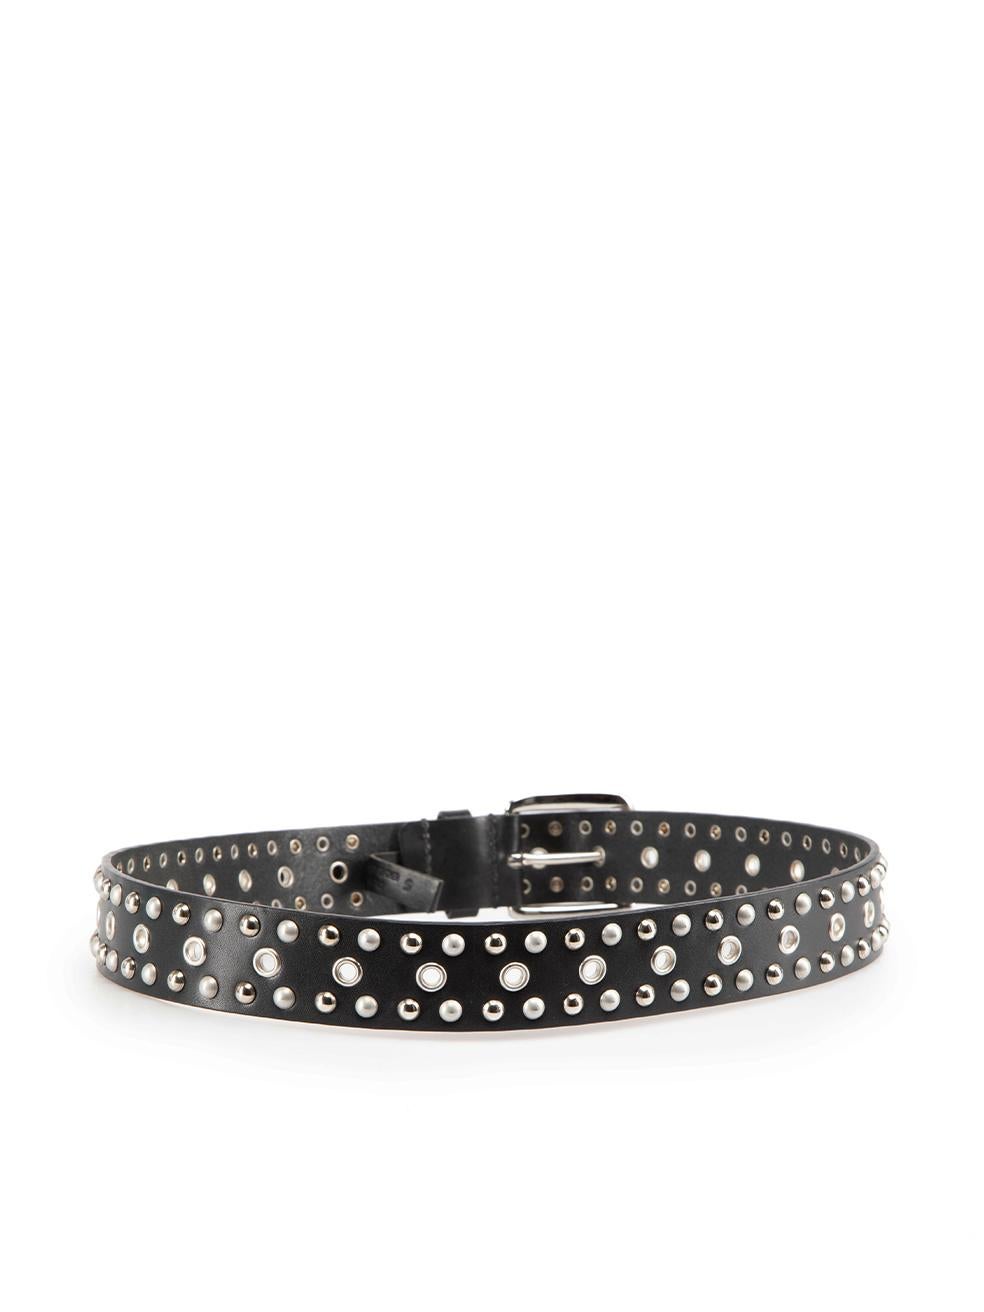 Isabel Marant Black Leather Eyelet Accent Belt In Excellent Condition In London, GB